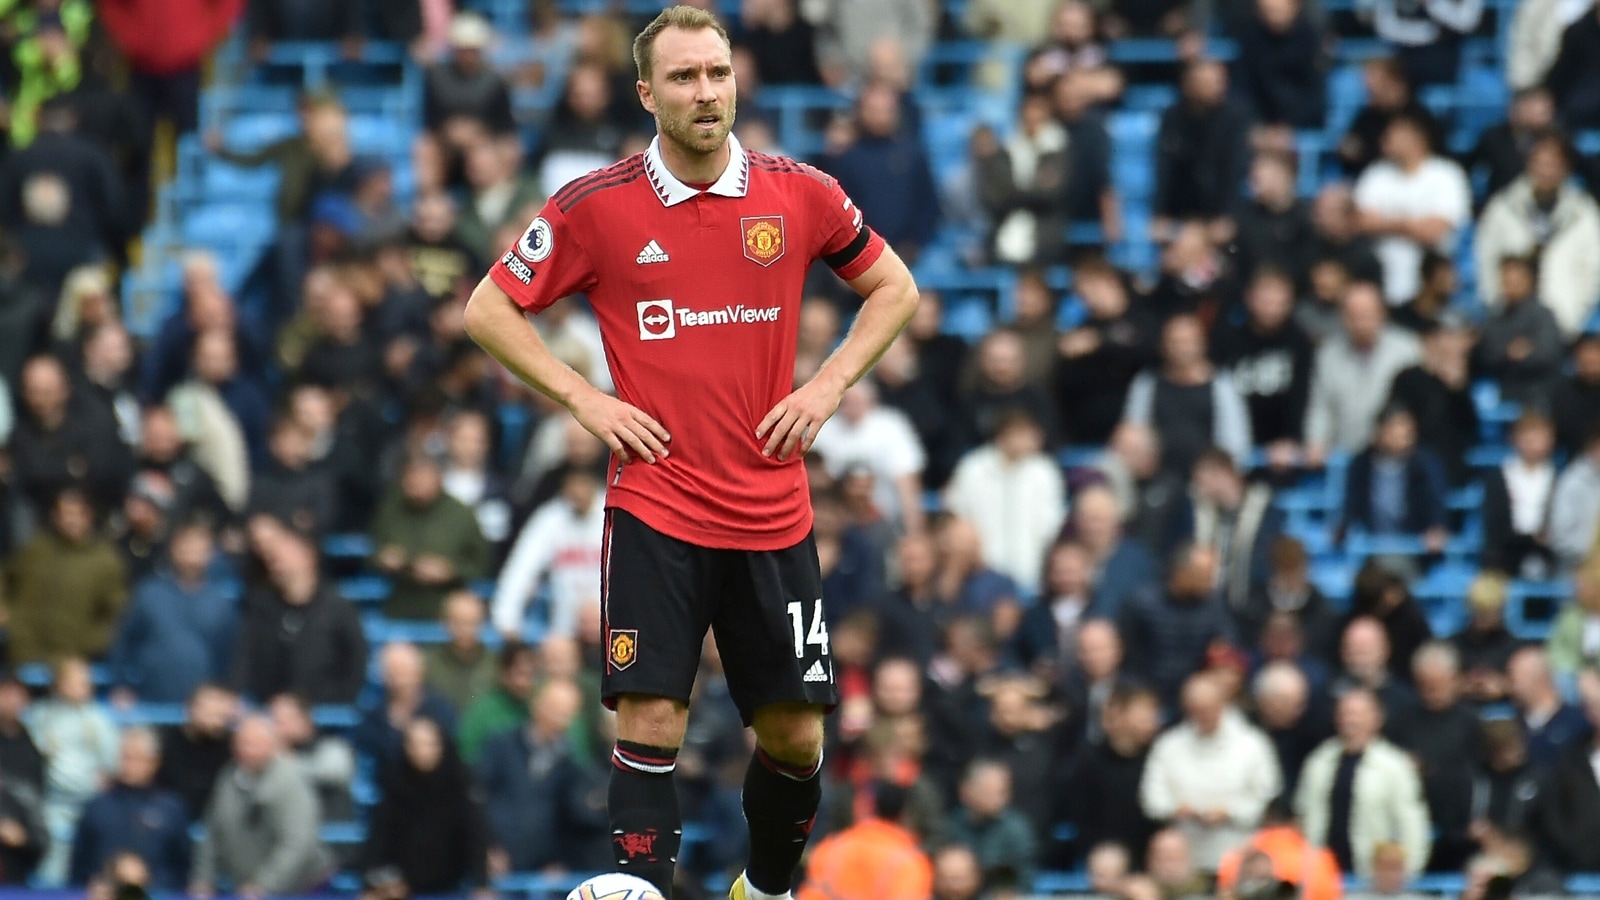 Manchester United’s performance ‘far from acceptable’ – Christian Eriksen